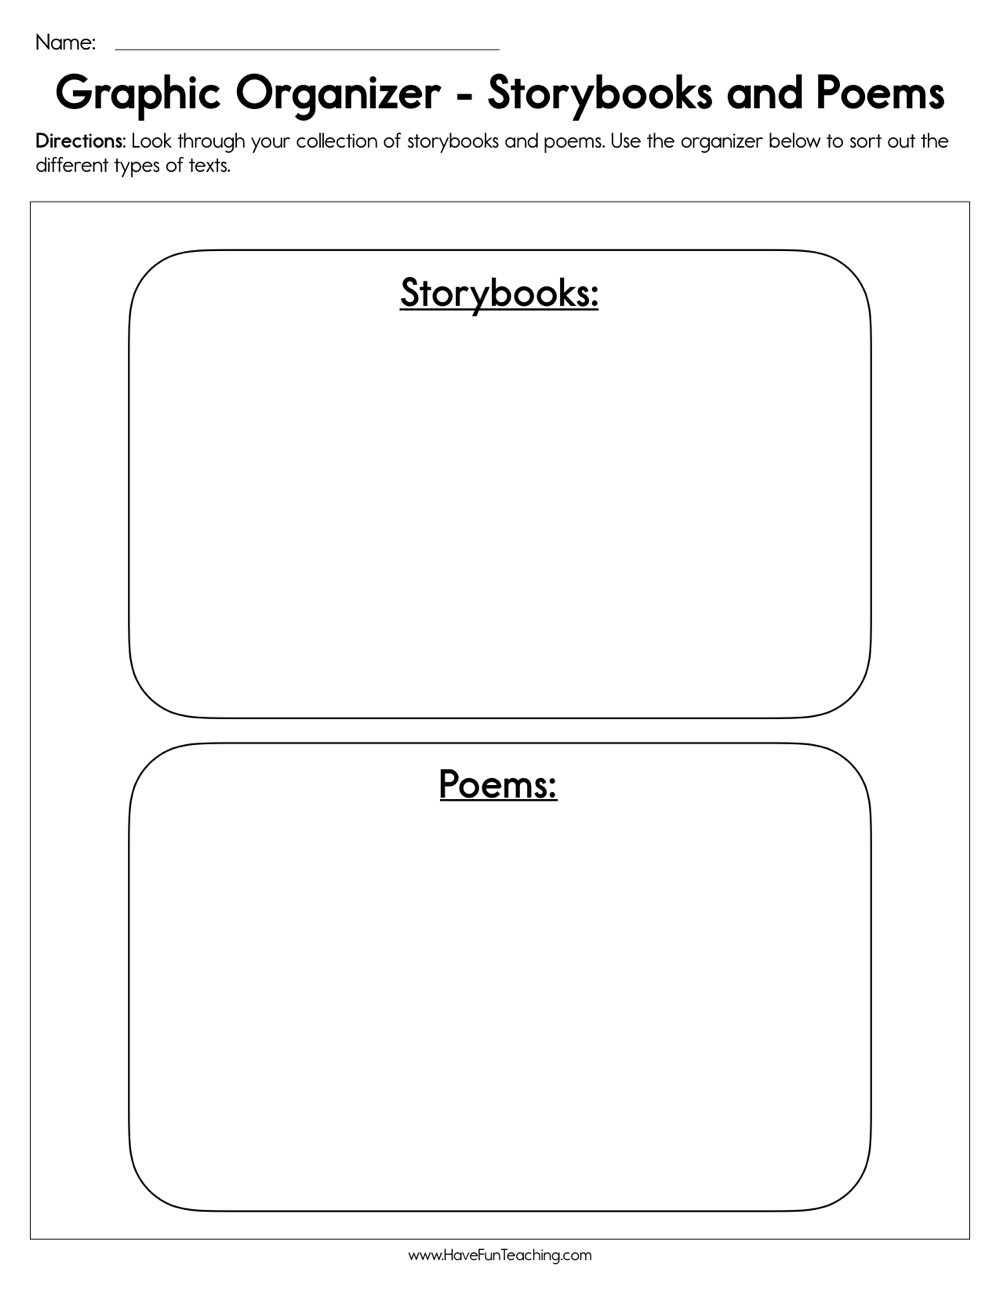 Resources | Have Fun Teaching - Free Printable Compare And Contrast Graphic Organizer